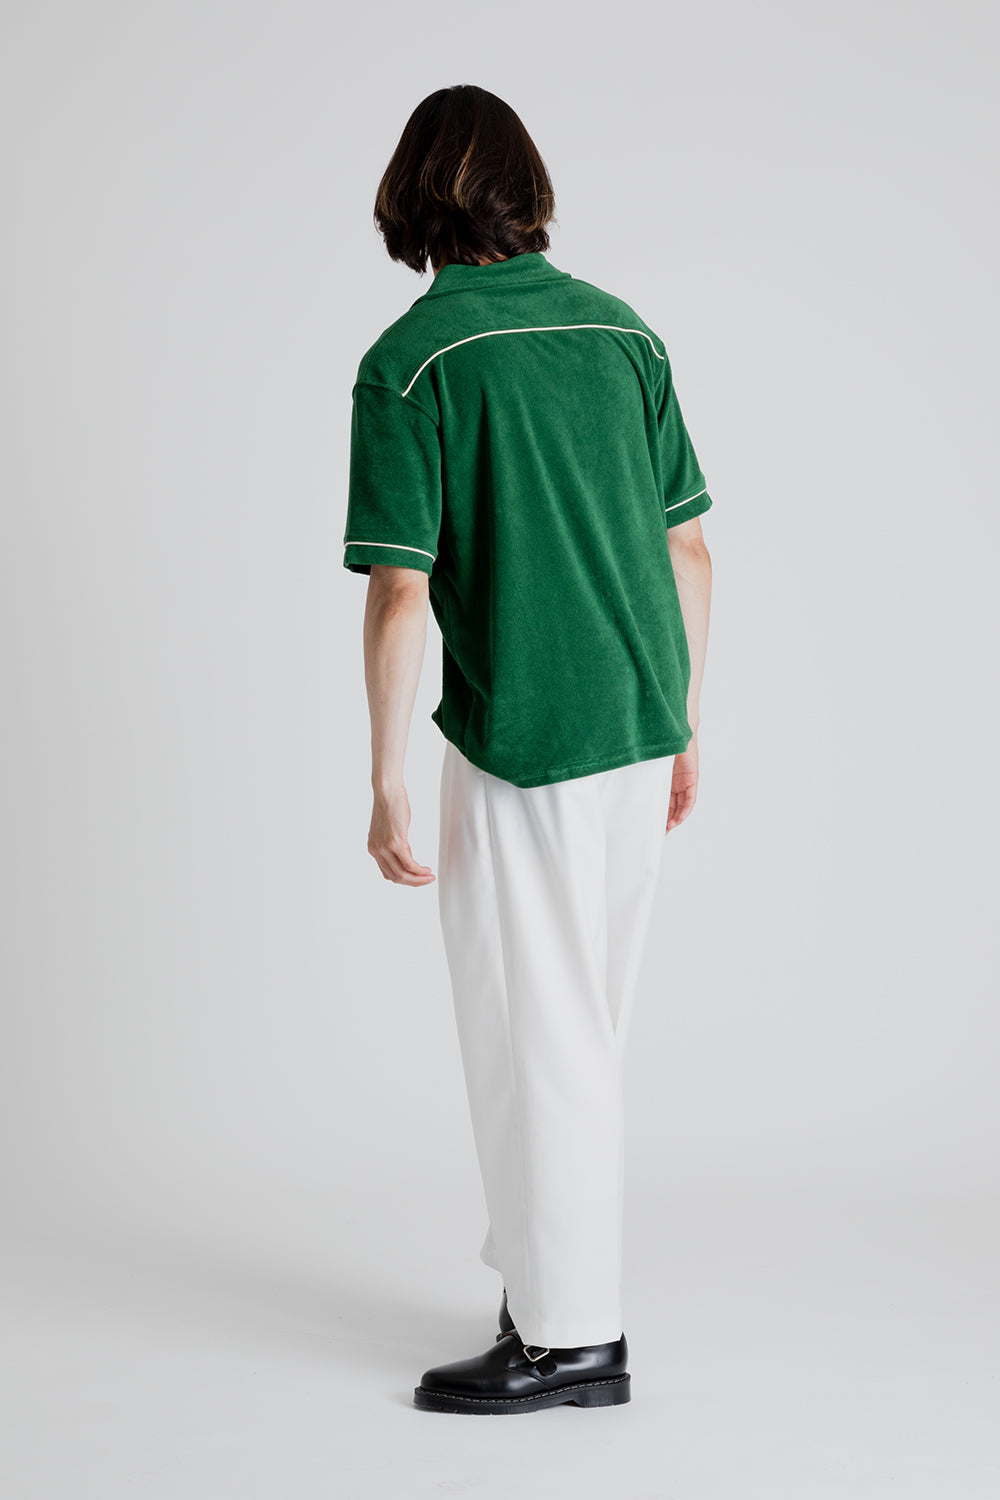 Frizmworks Terry Open Collar Shirt in Forest Green